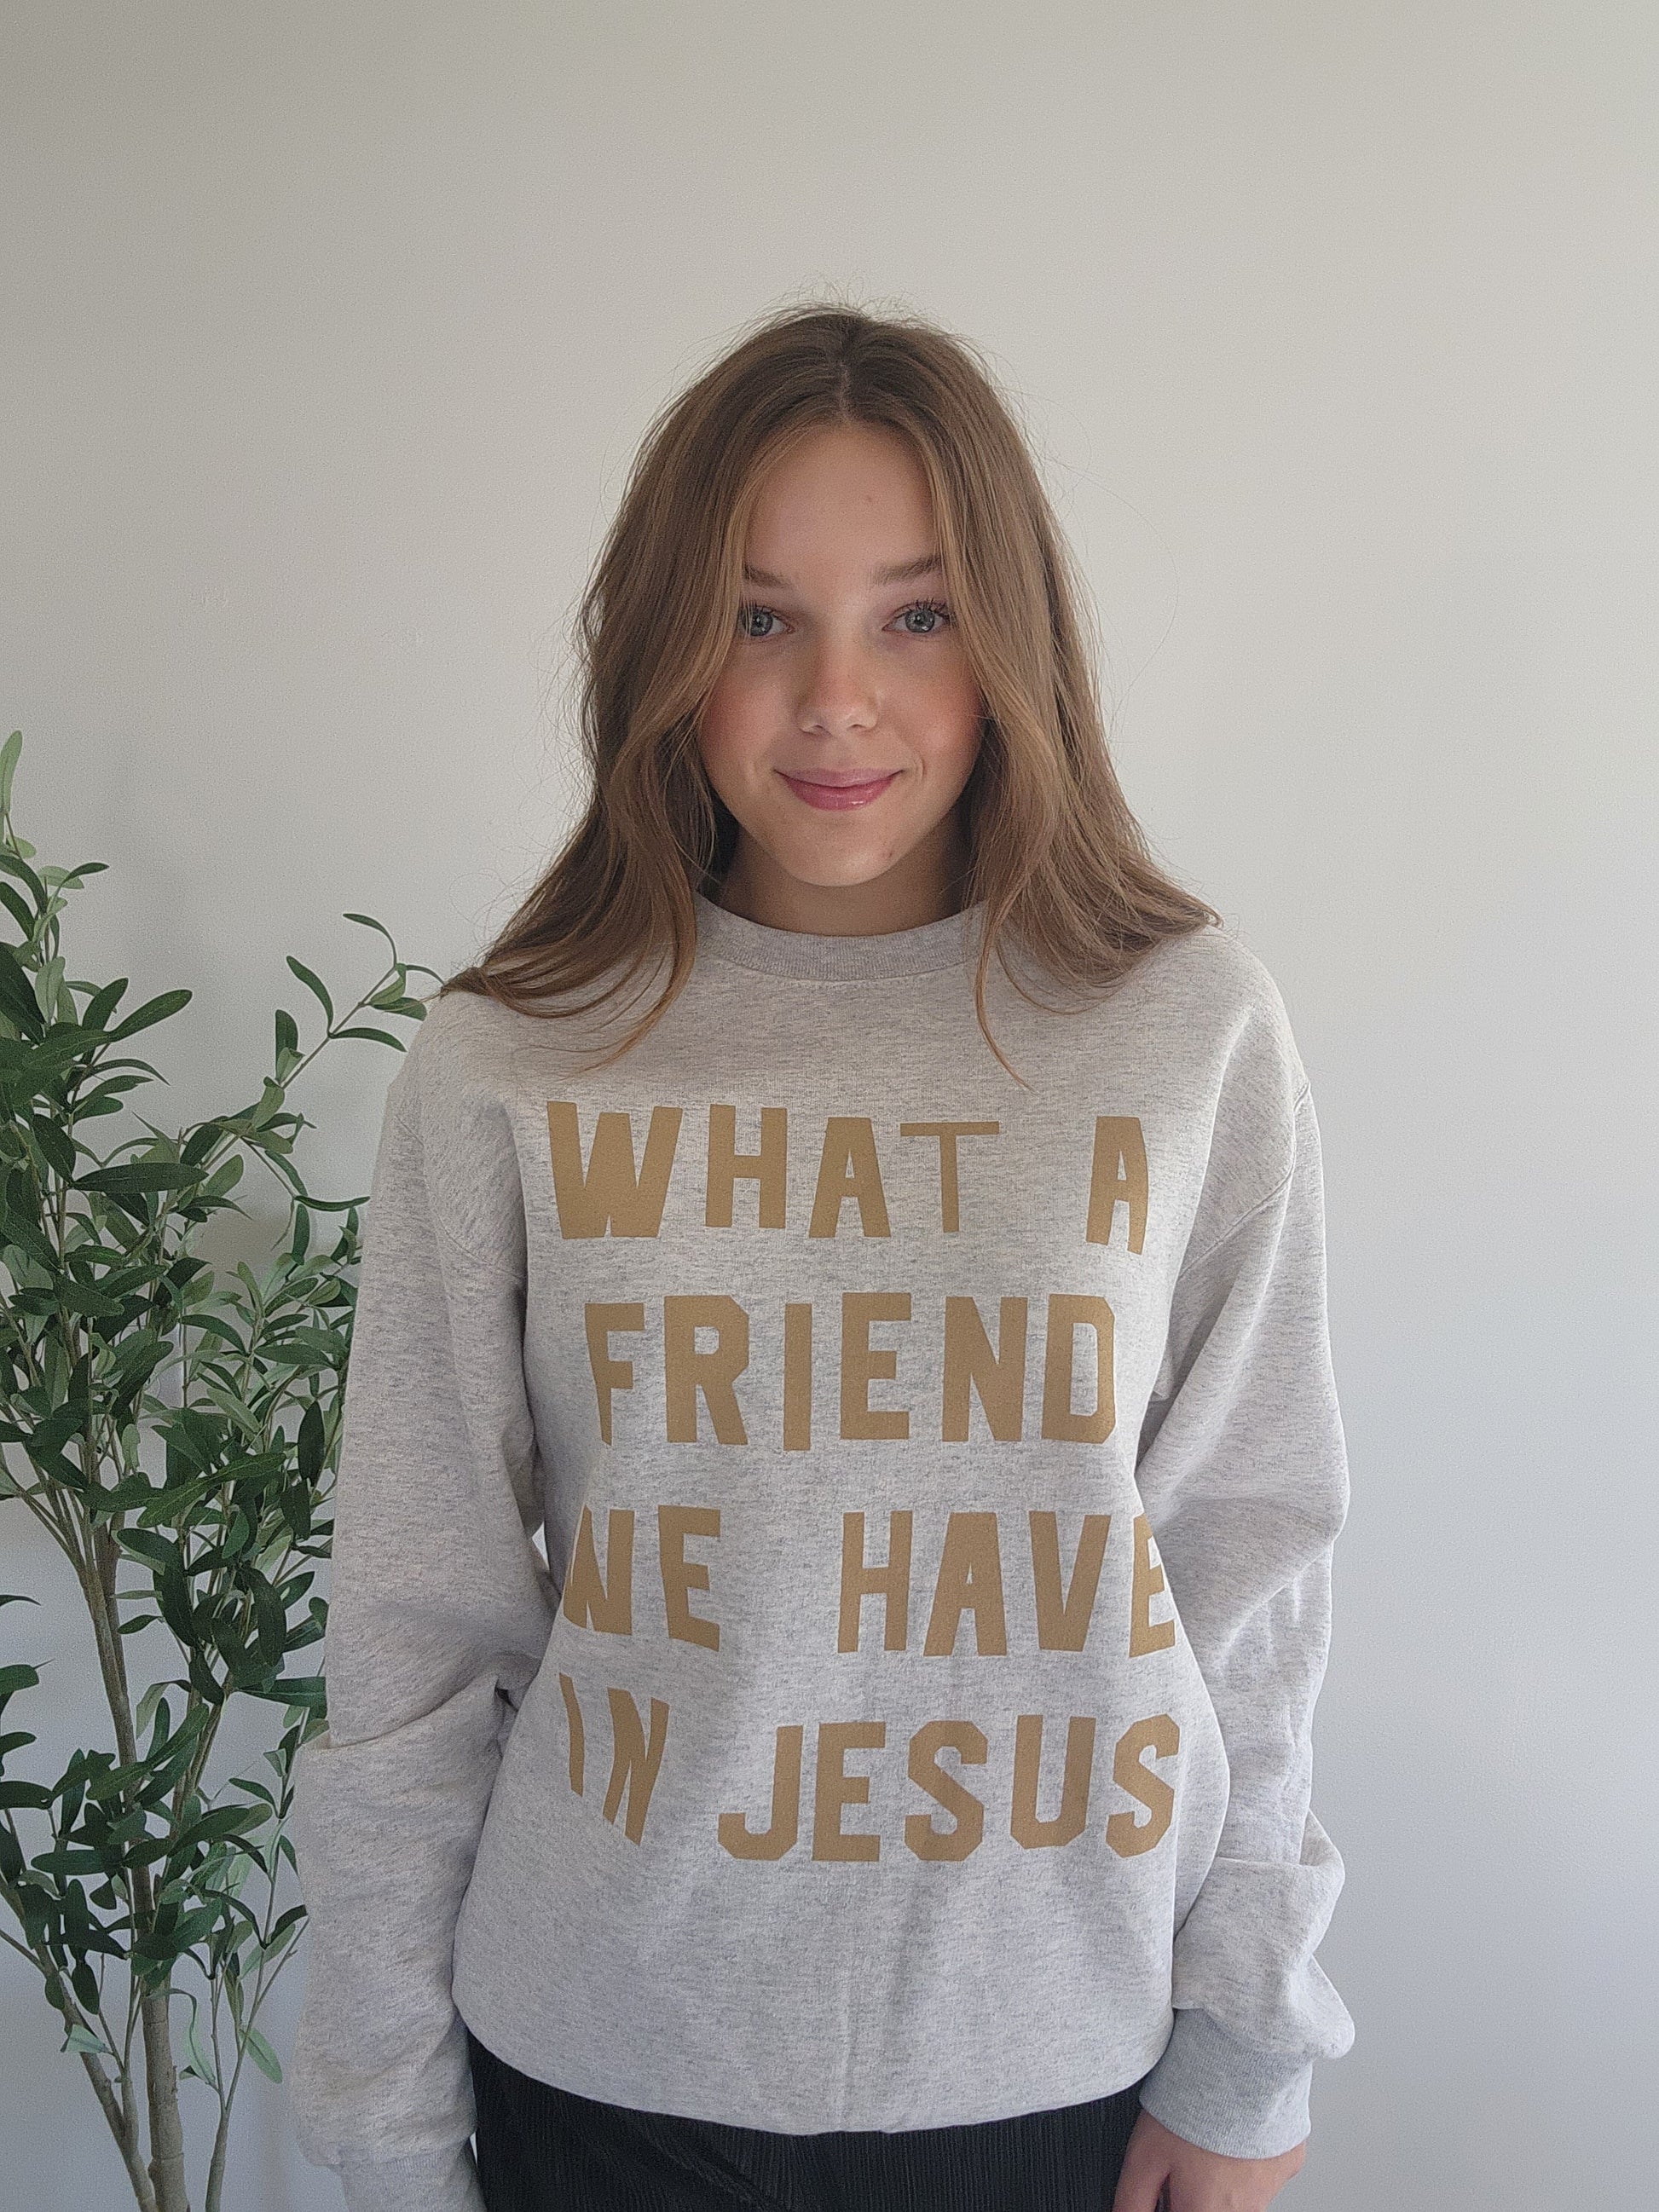 What A Friend We Have In Jesus Sweatshirt Light Grey and Tan Oliver & Otis